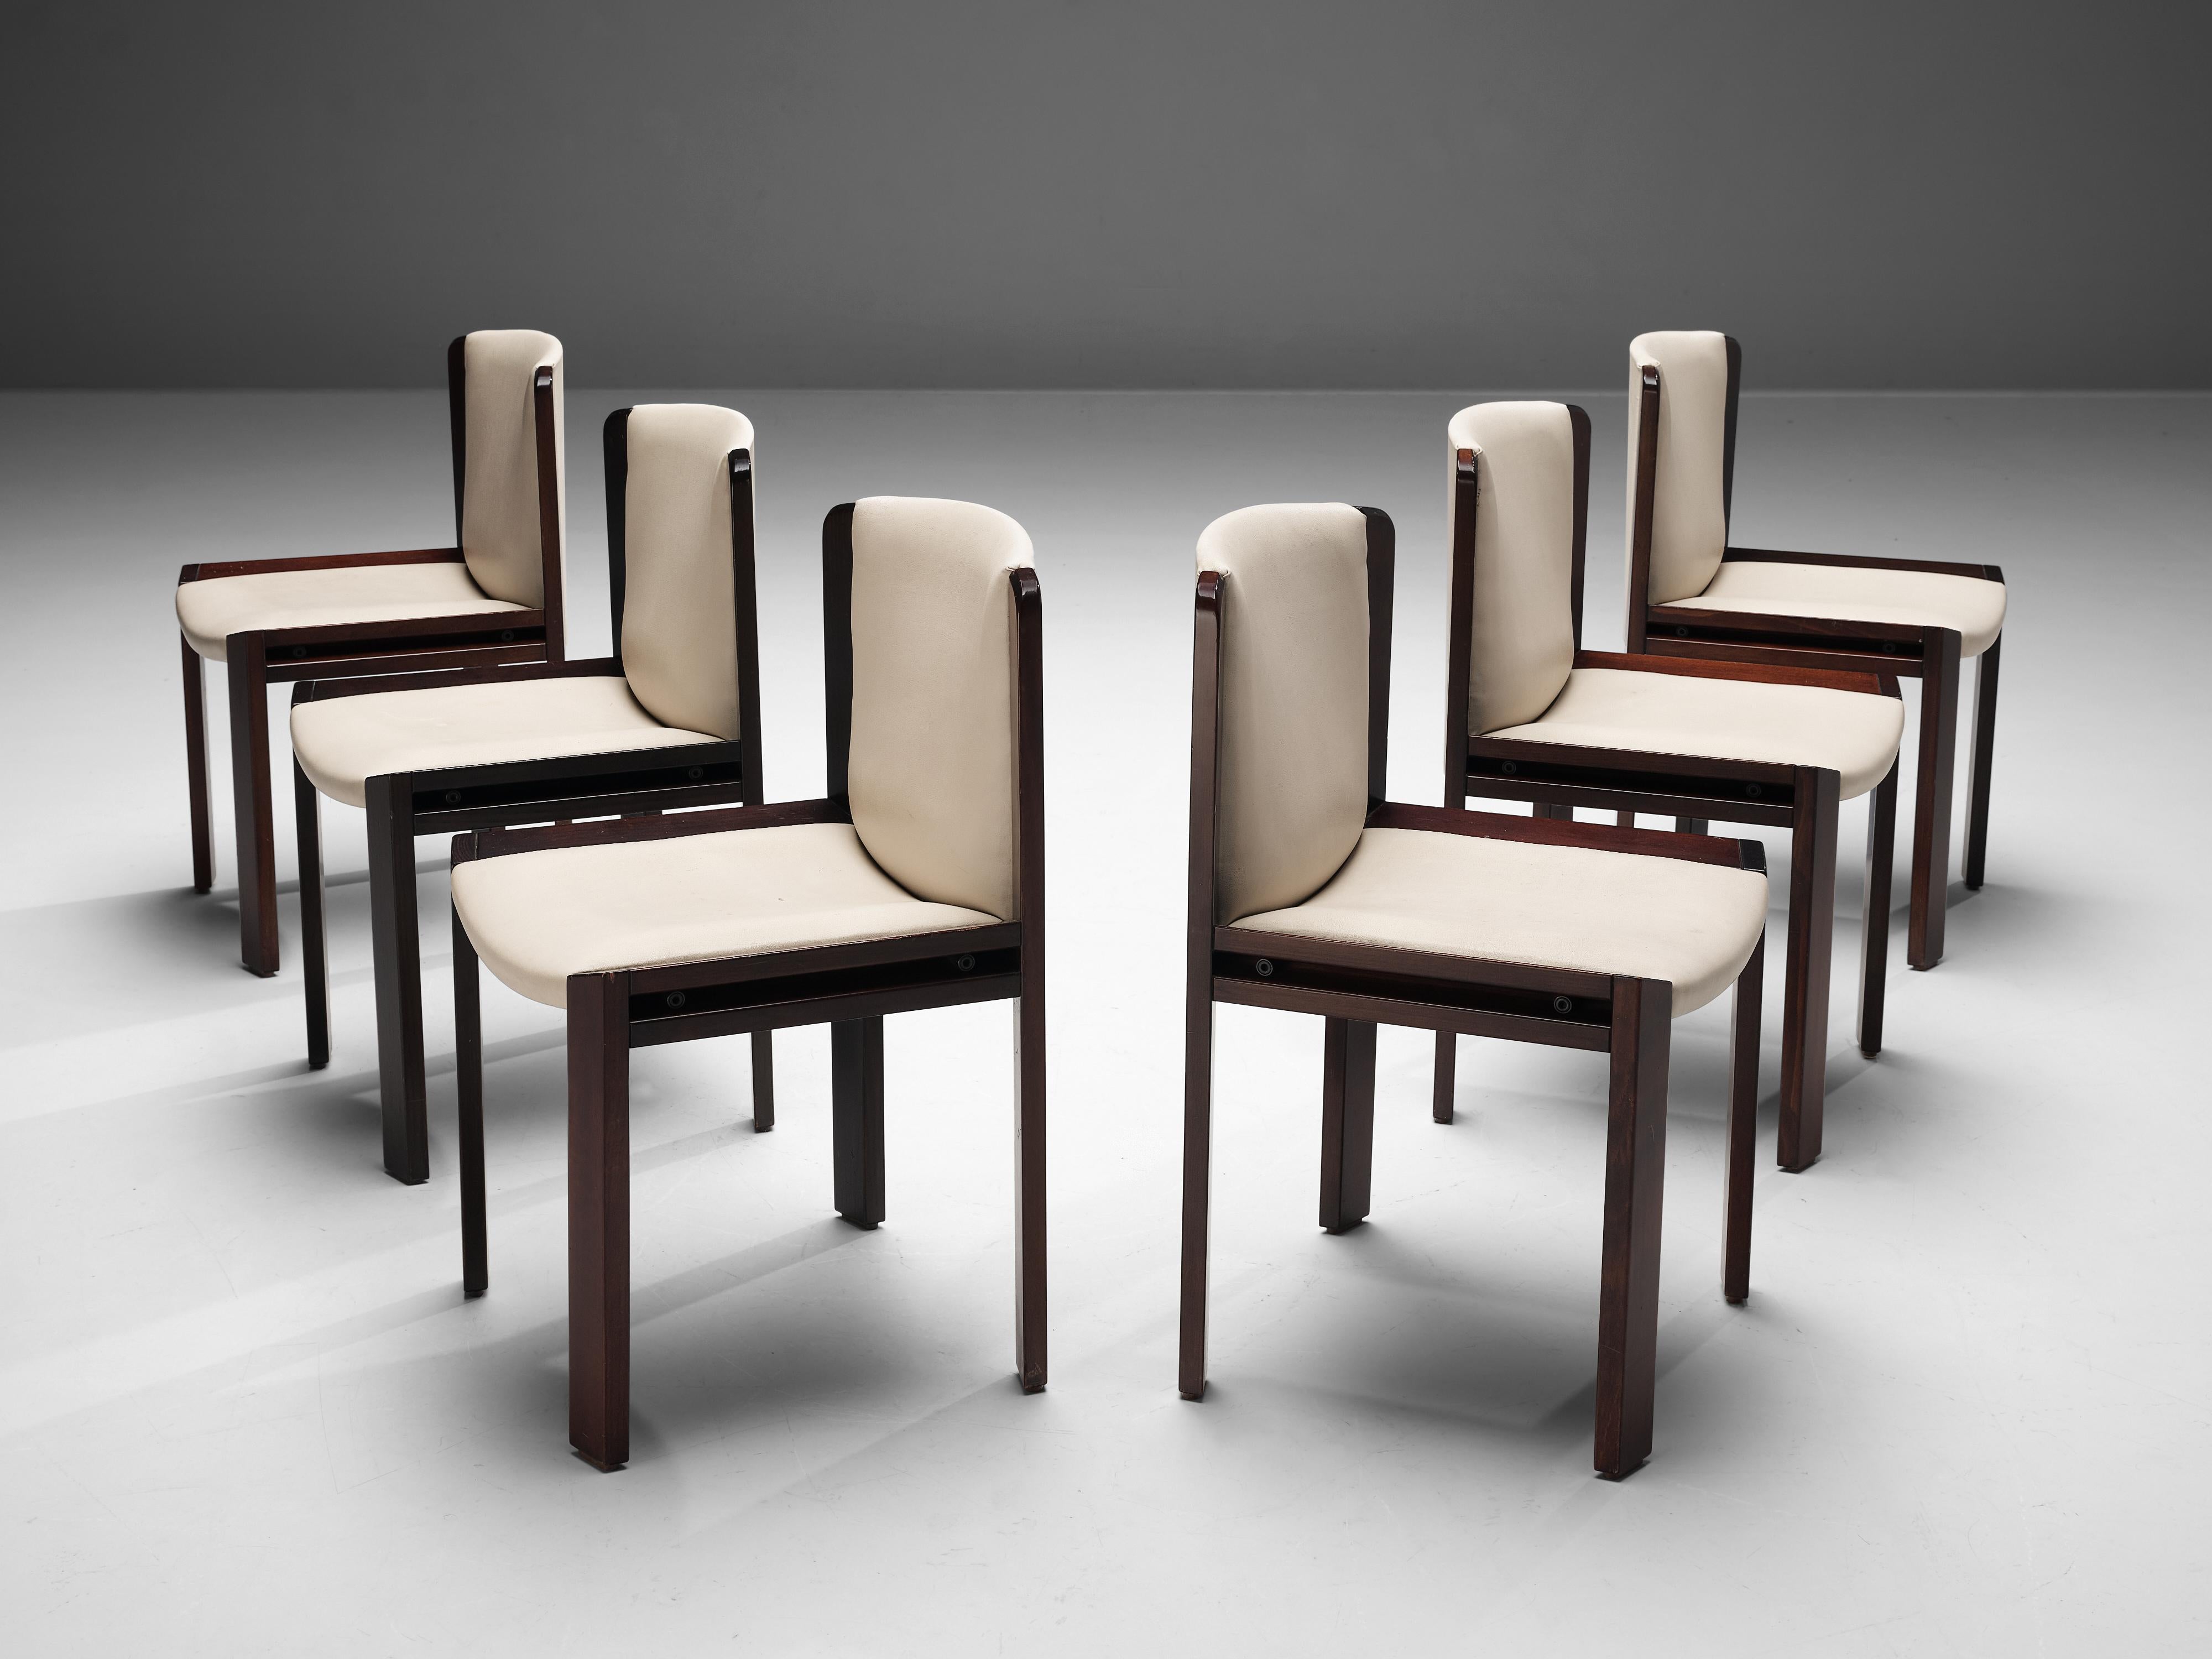 Joe Colombo for Pozzi, set of six dining chairs '300', leather, oak, Italy, 1966.

Functionalist set of six dining chairs is designed by Joe Colombo in 1966. Colombo's fascination with functionality meant he always focused on the user, which lead